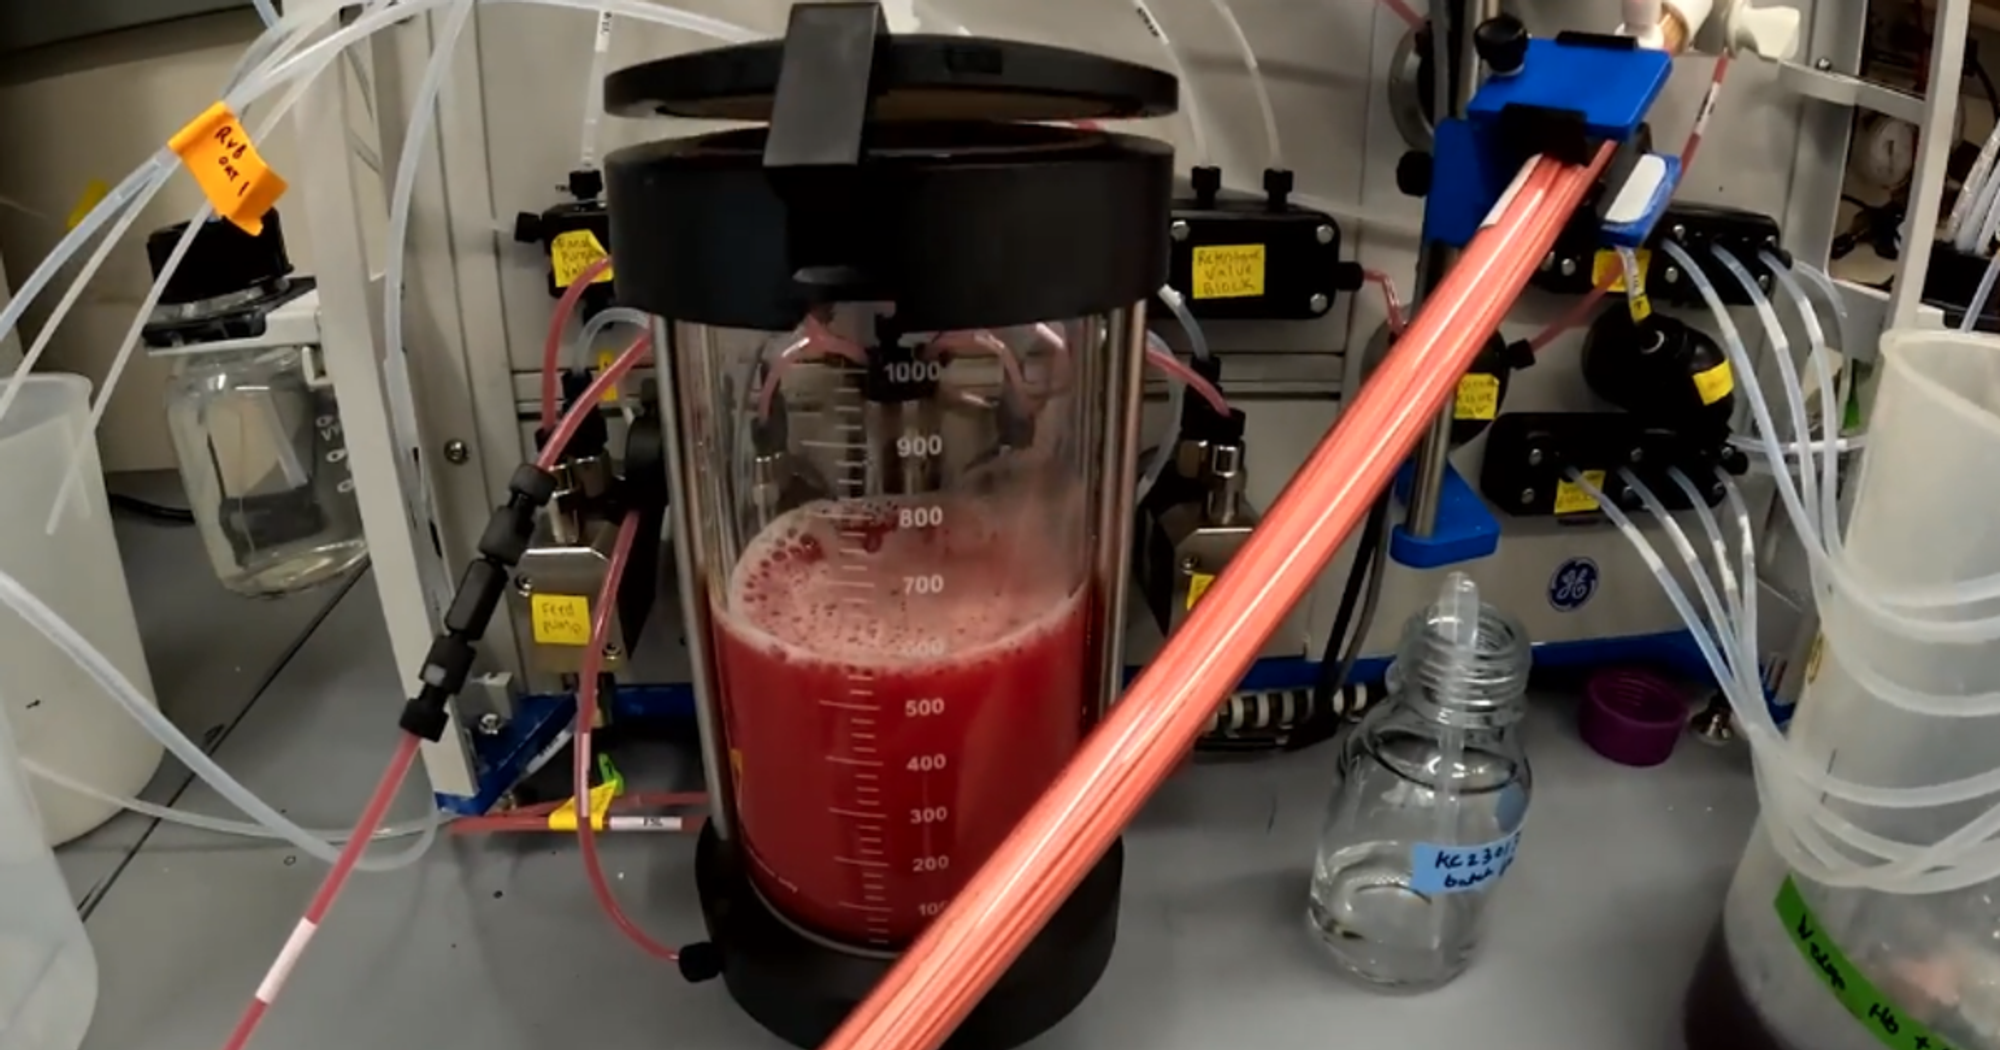 Artificial blood being developed in Baltimore could save lives in emergencies - CBS News